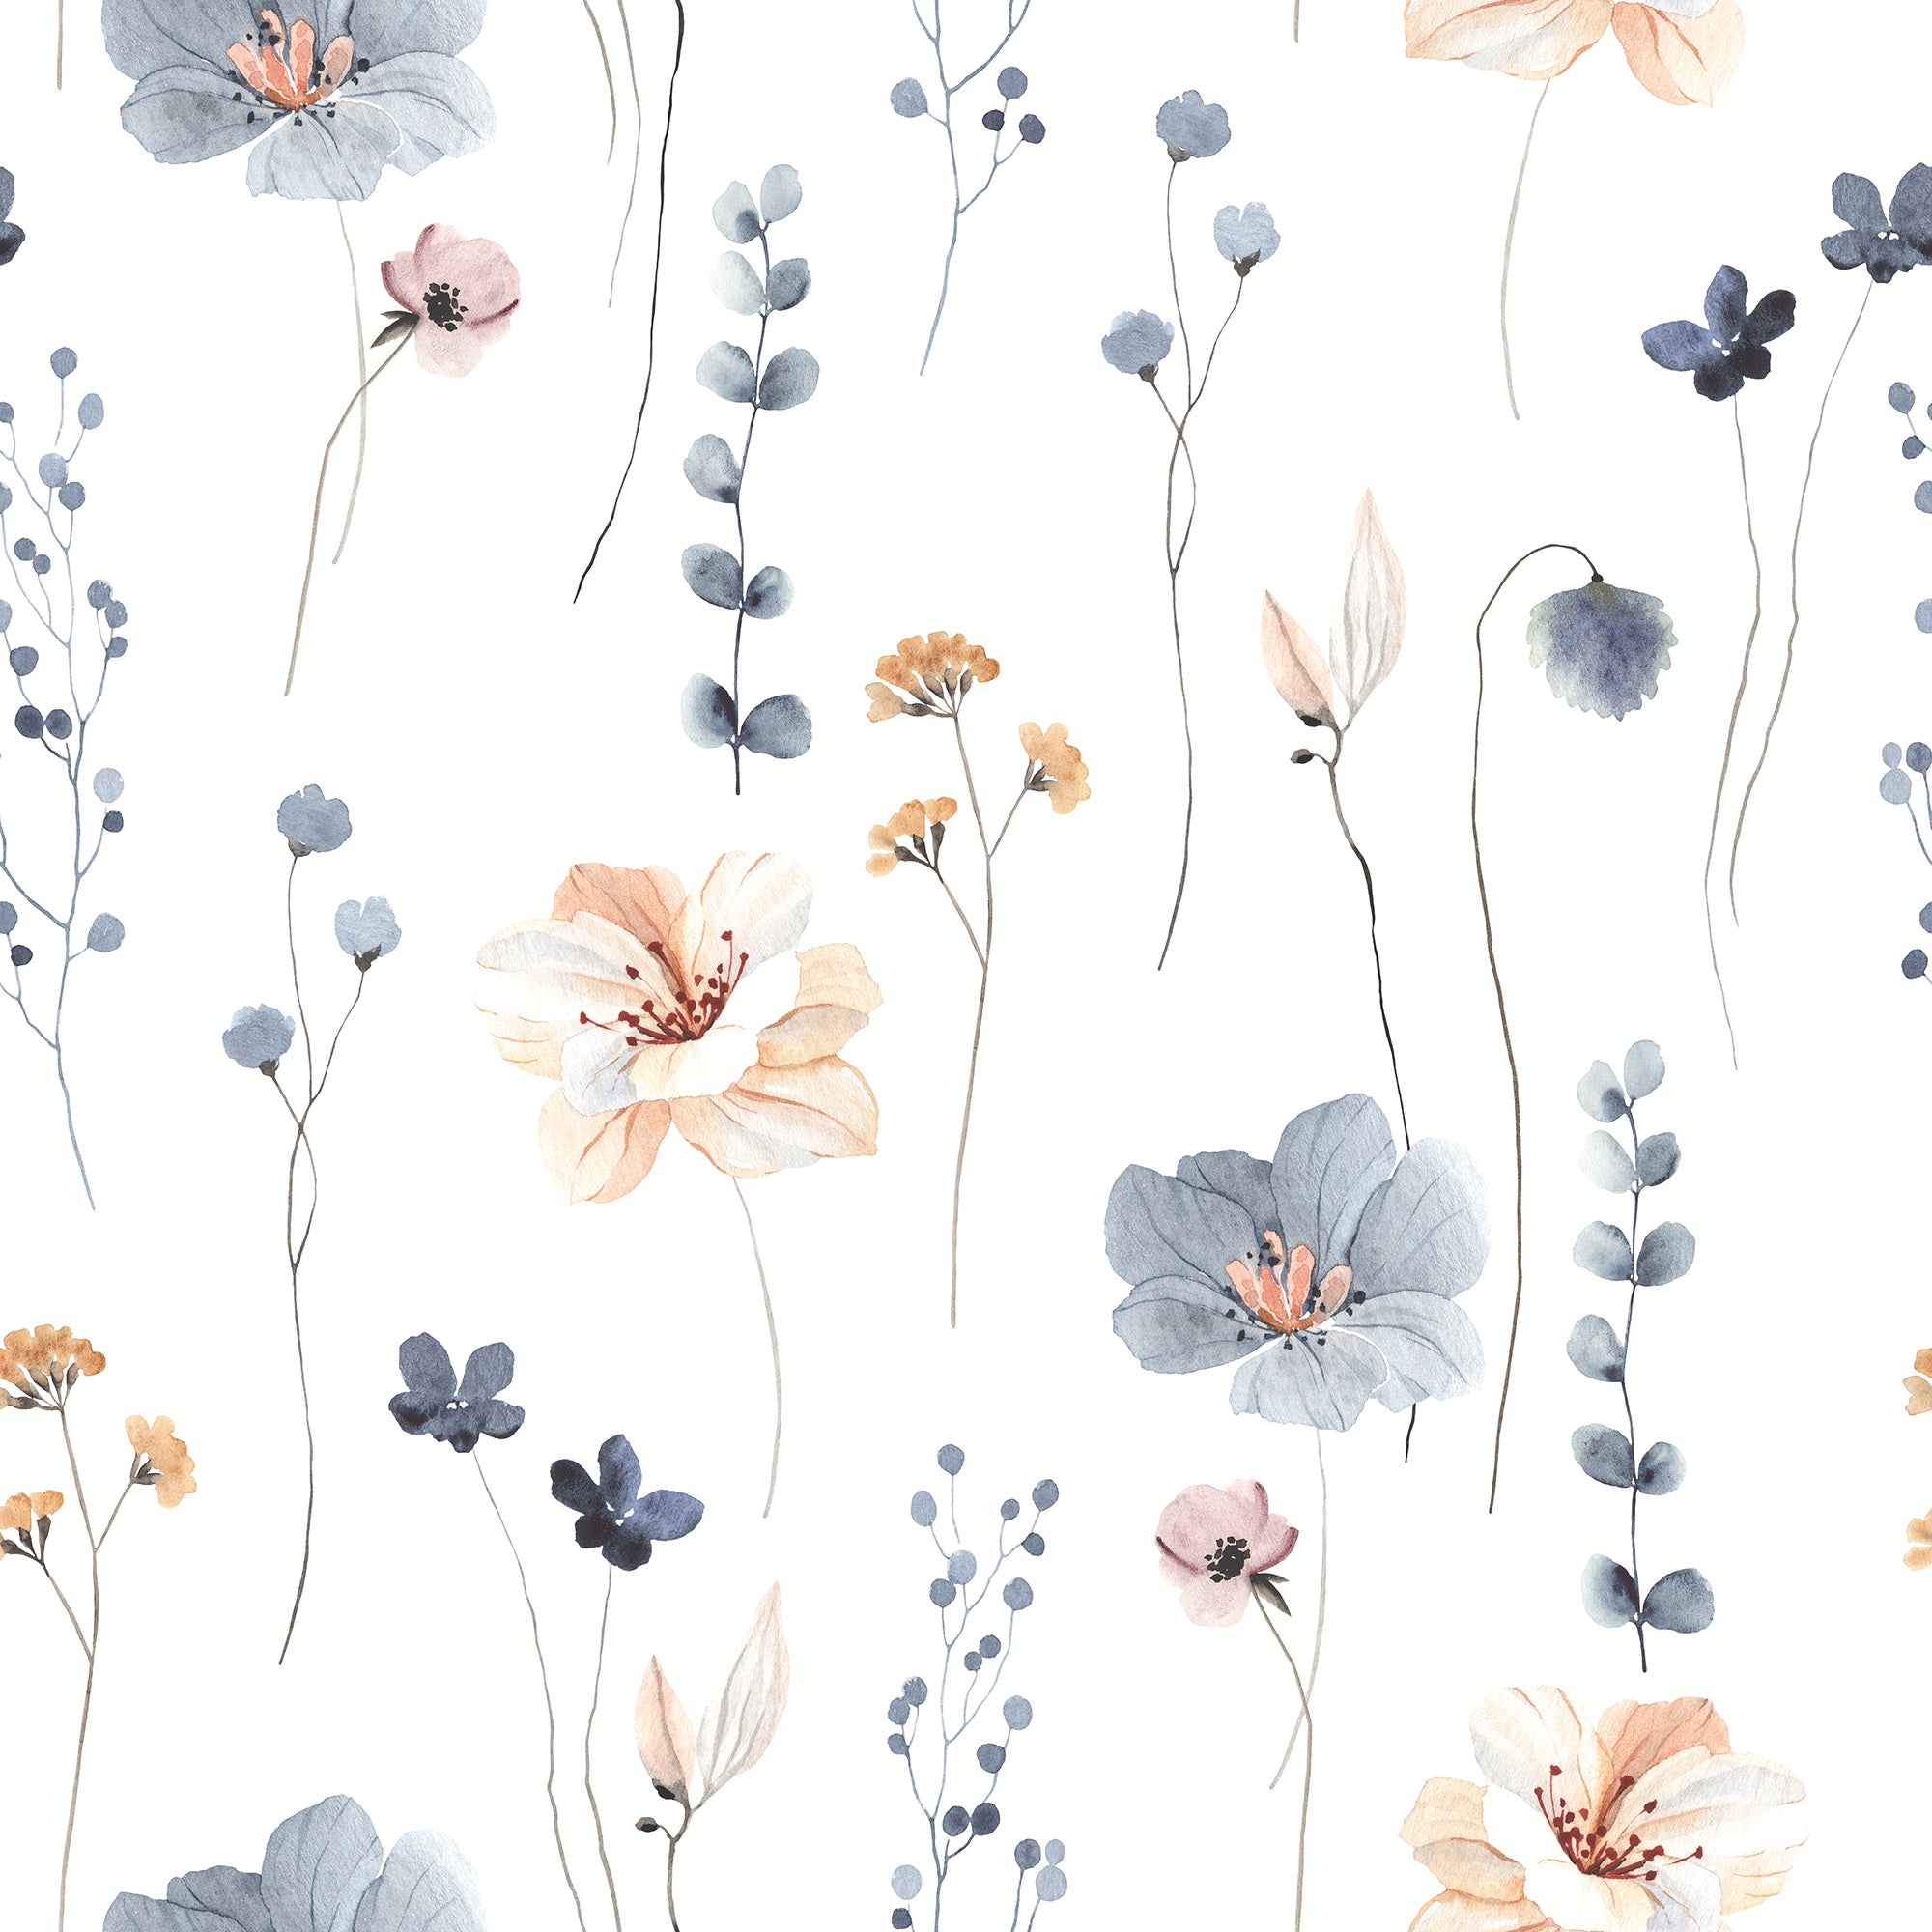 A seamless pattern of the Watercolour Floral - Summer wallpaper, showcasing soft watercolor flowers in shades of blue, peach, and tan on a white background, evoking a breezy summer garden.